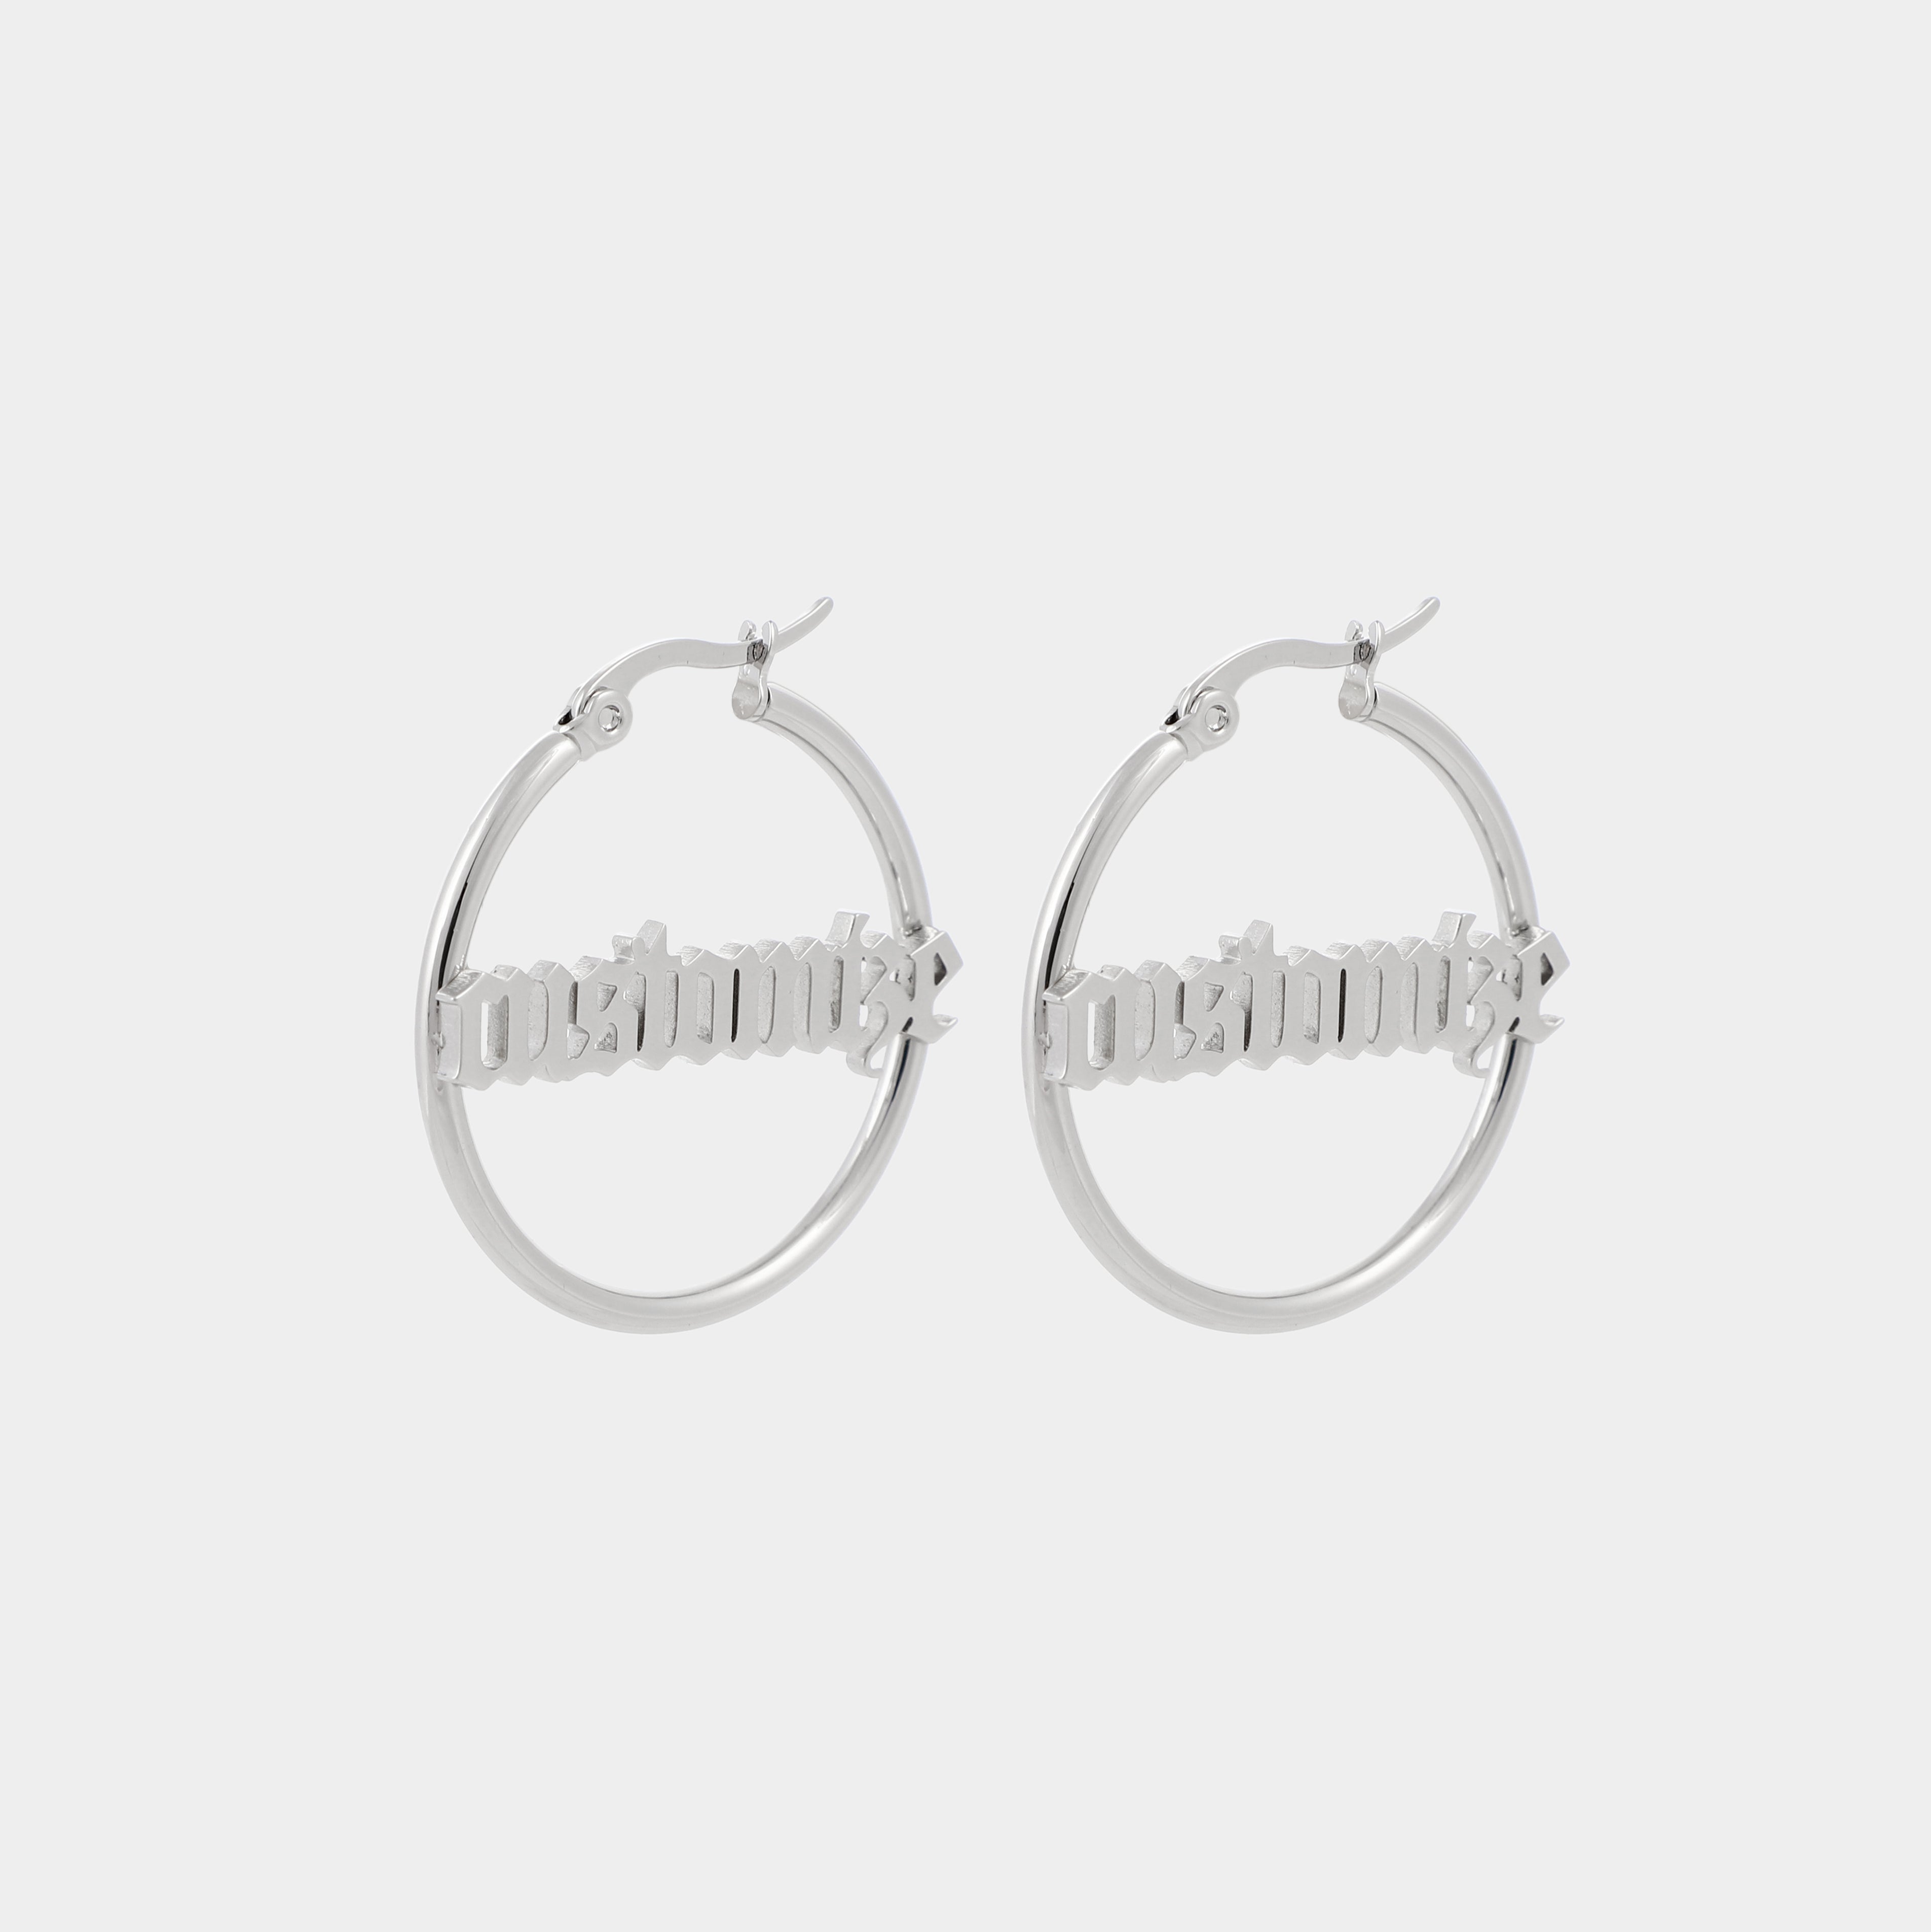 PERSONALIZED HOOP EARRING - Old English